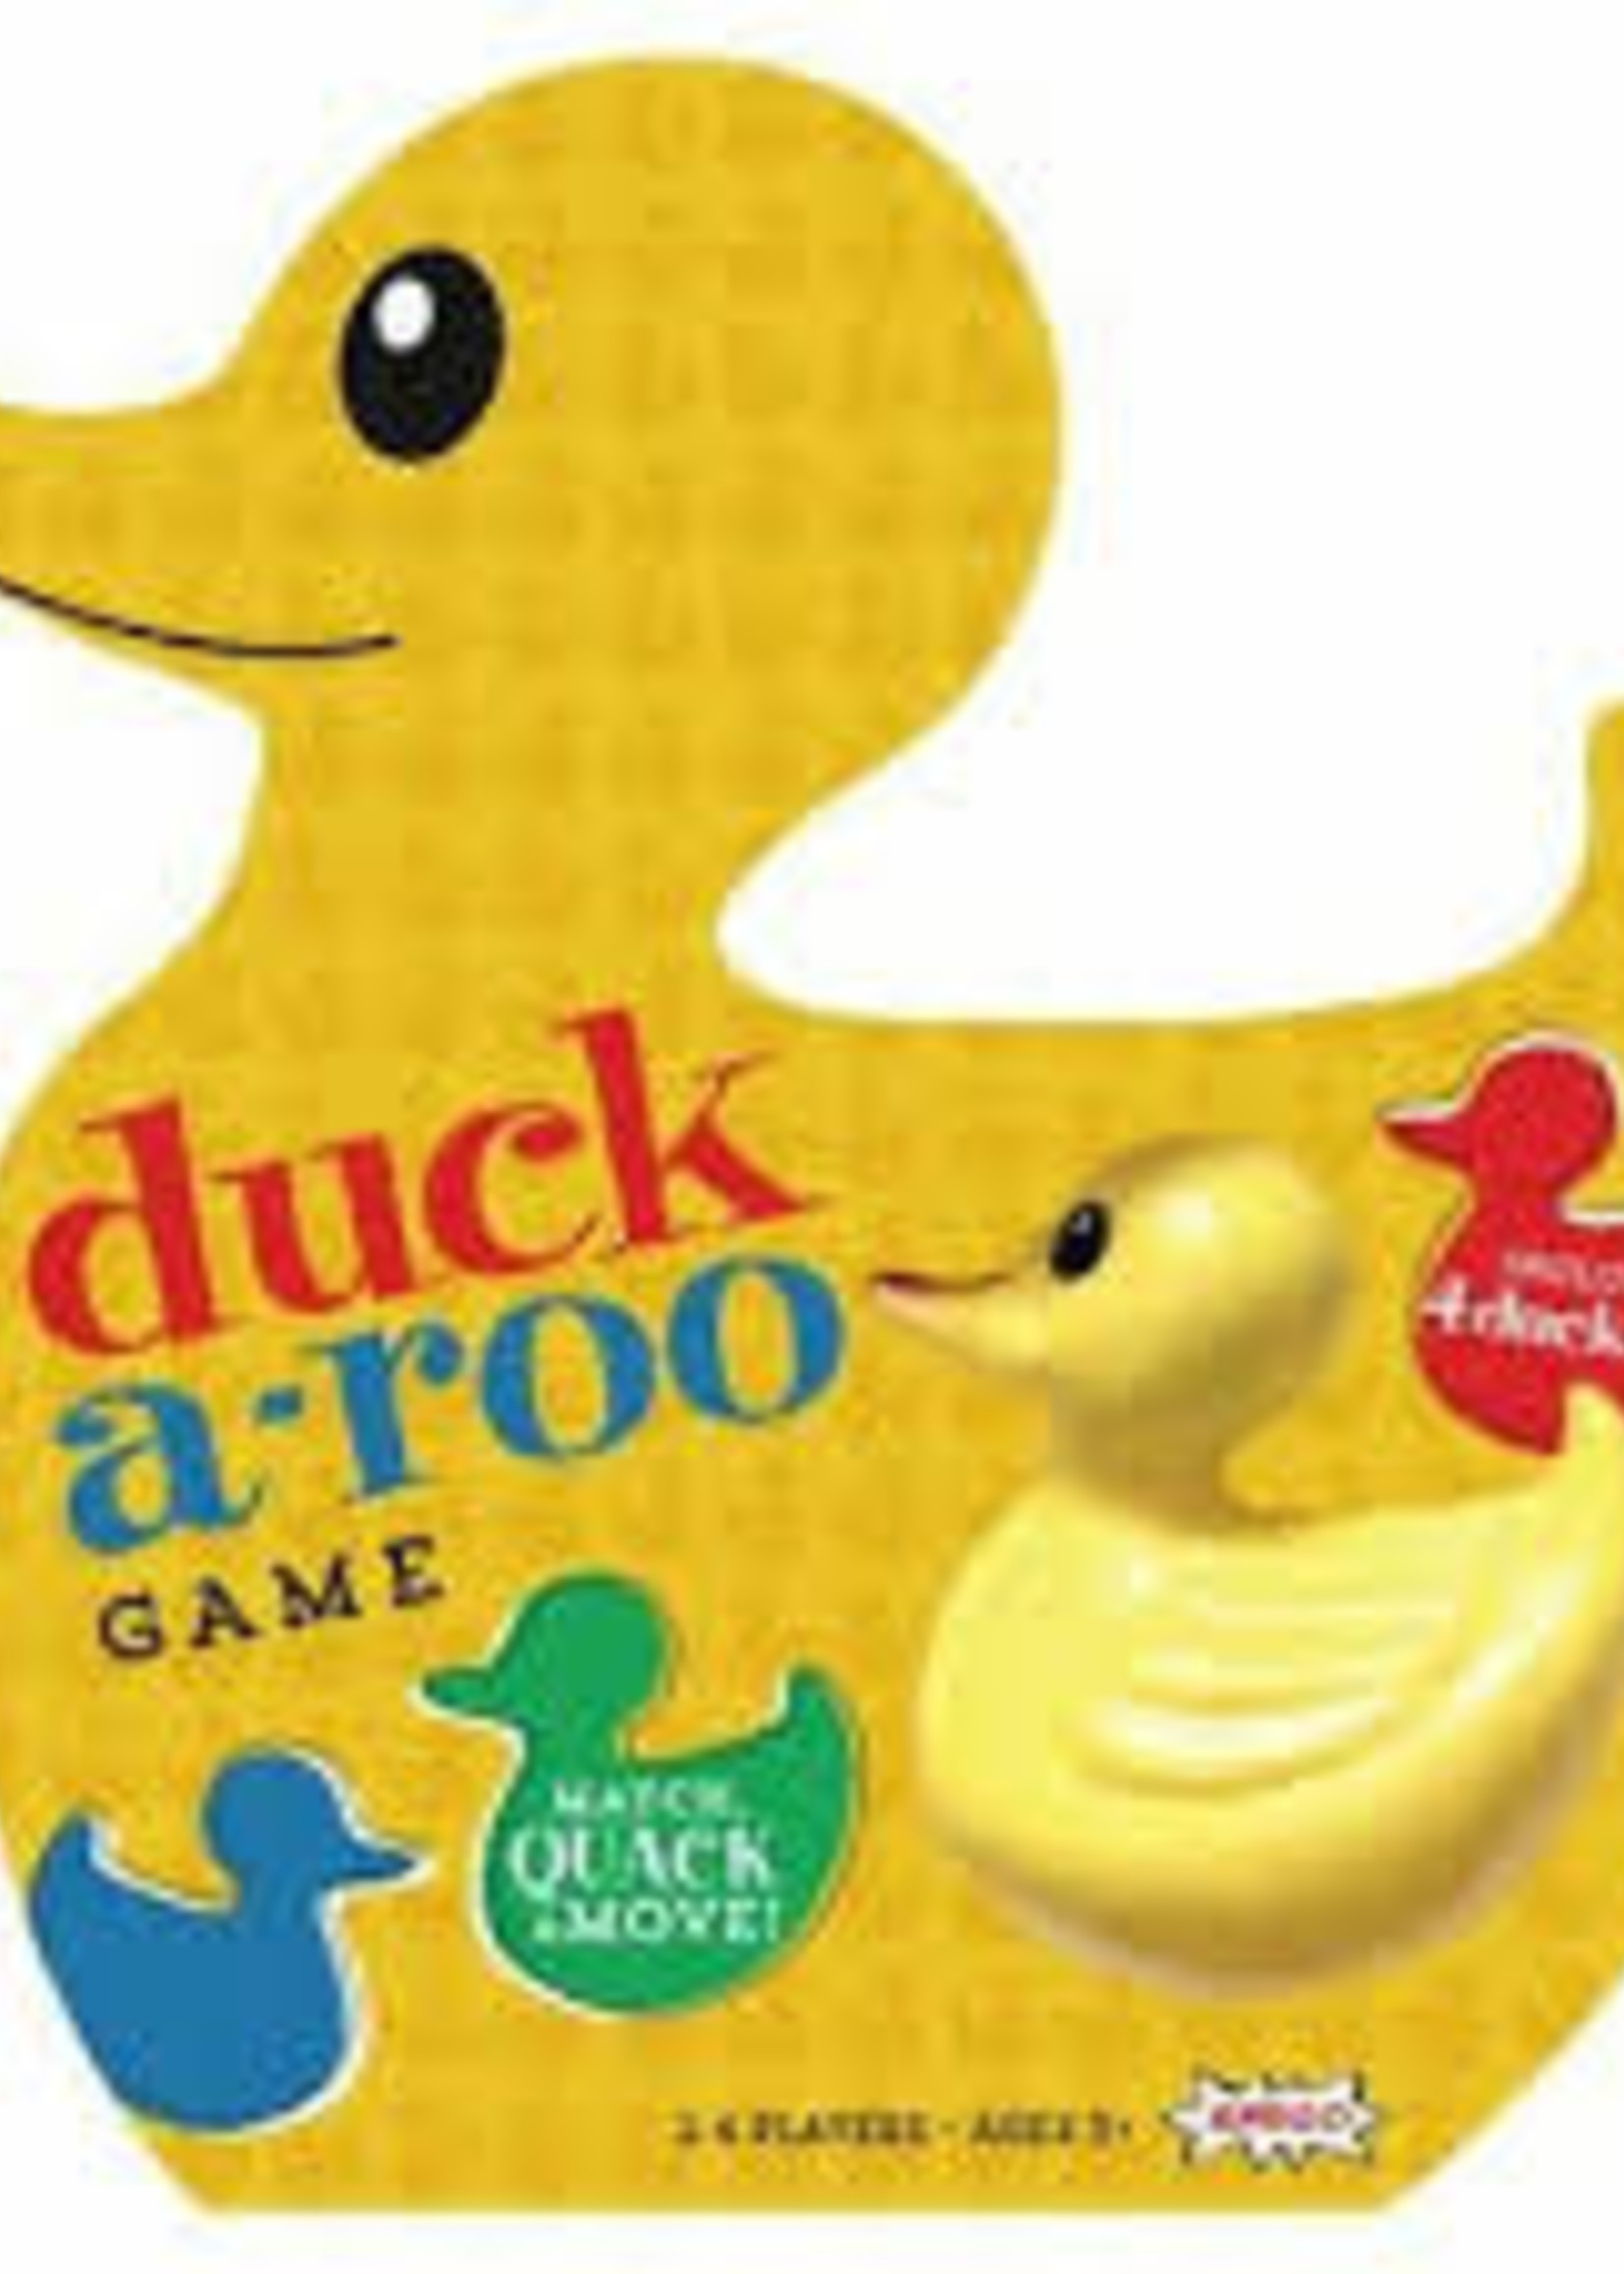 duck a-roo game